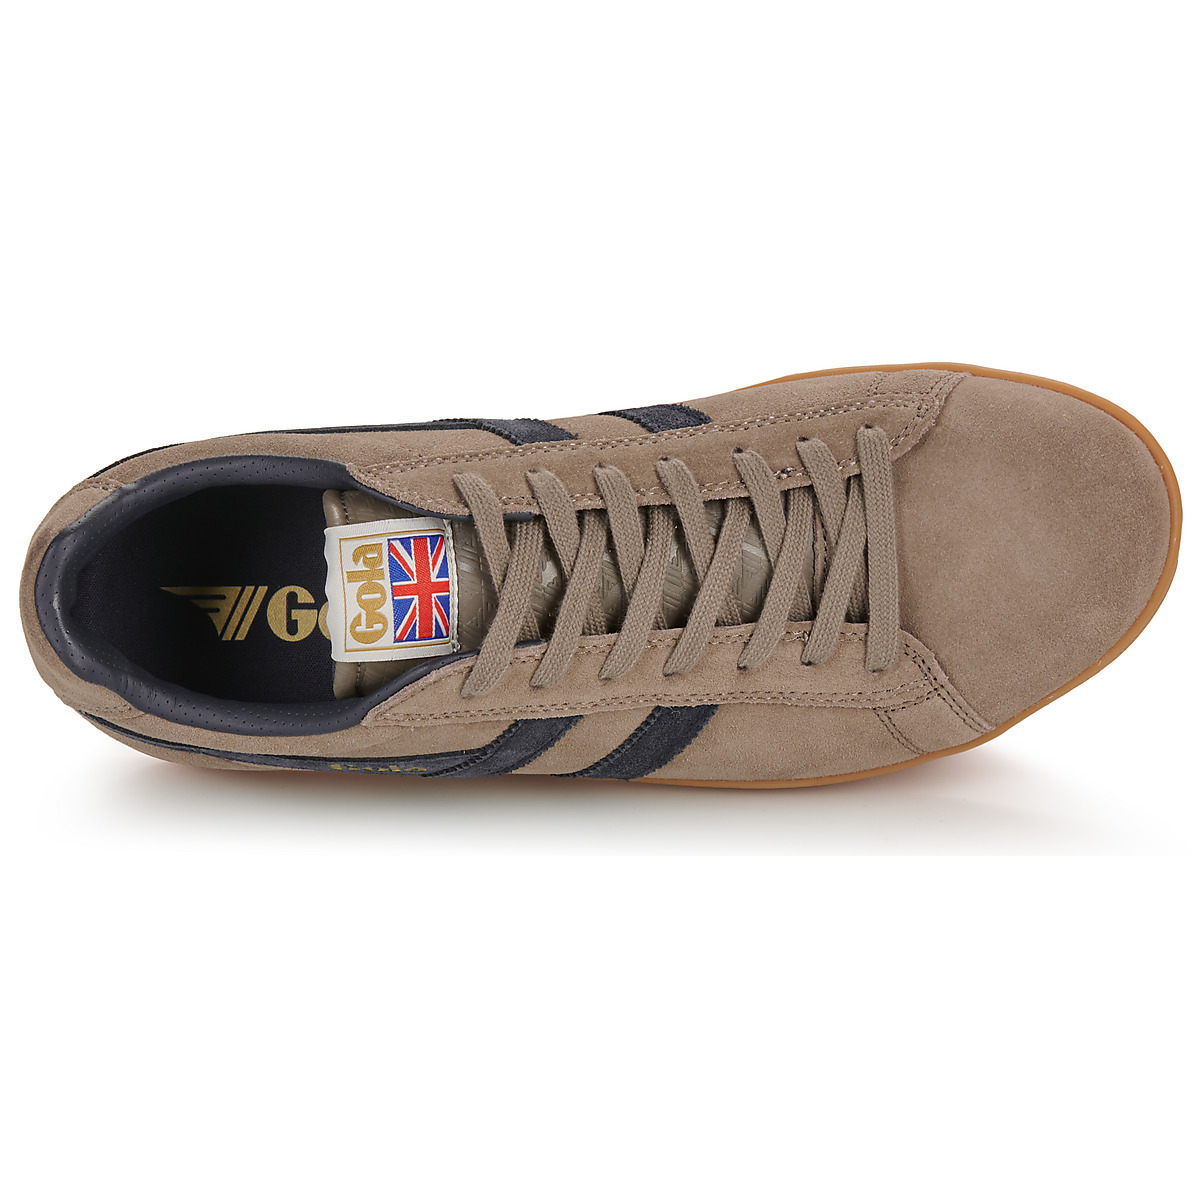 Gola Taupe / Noir EQUIPE SUEDE UiLcntWr